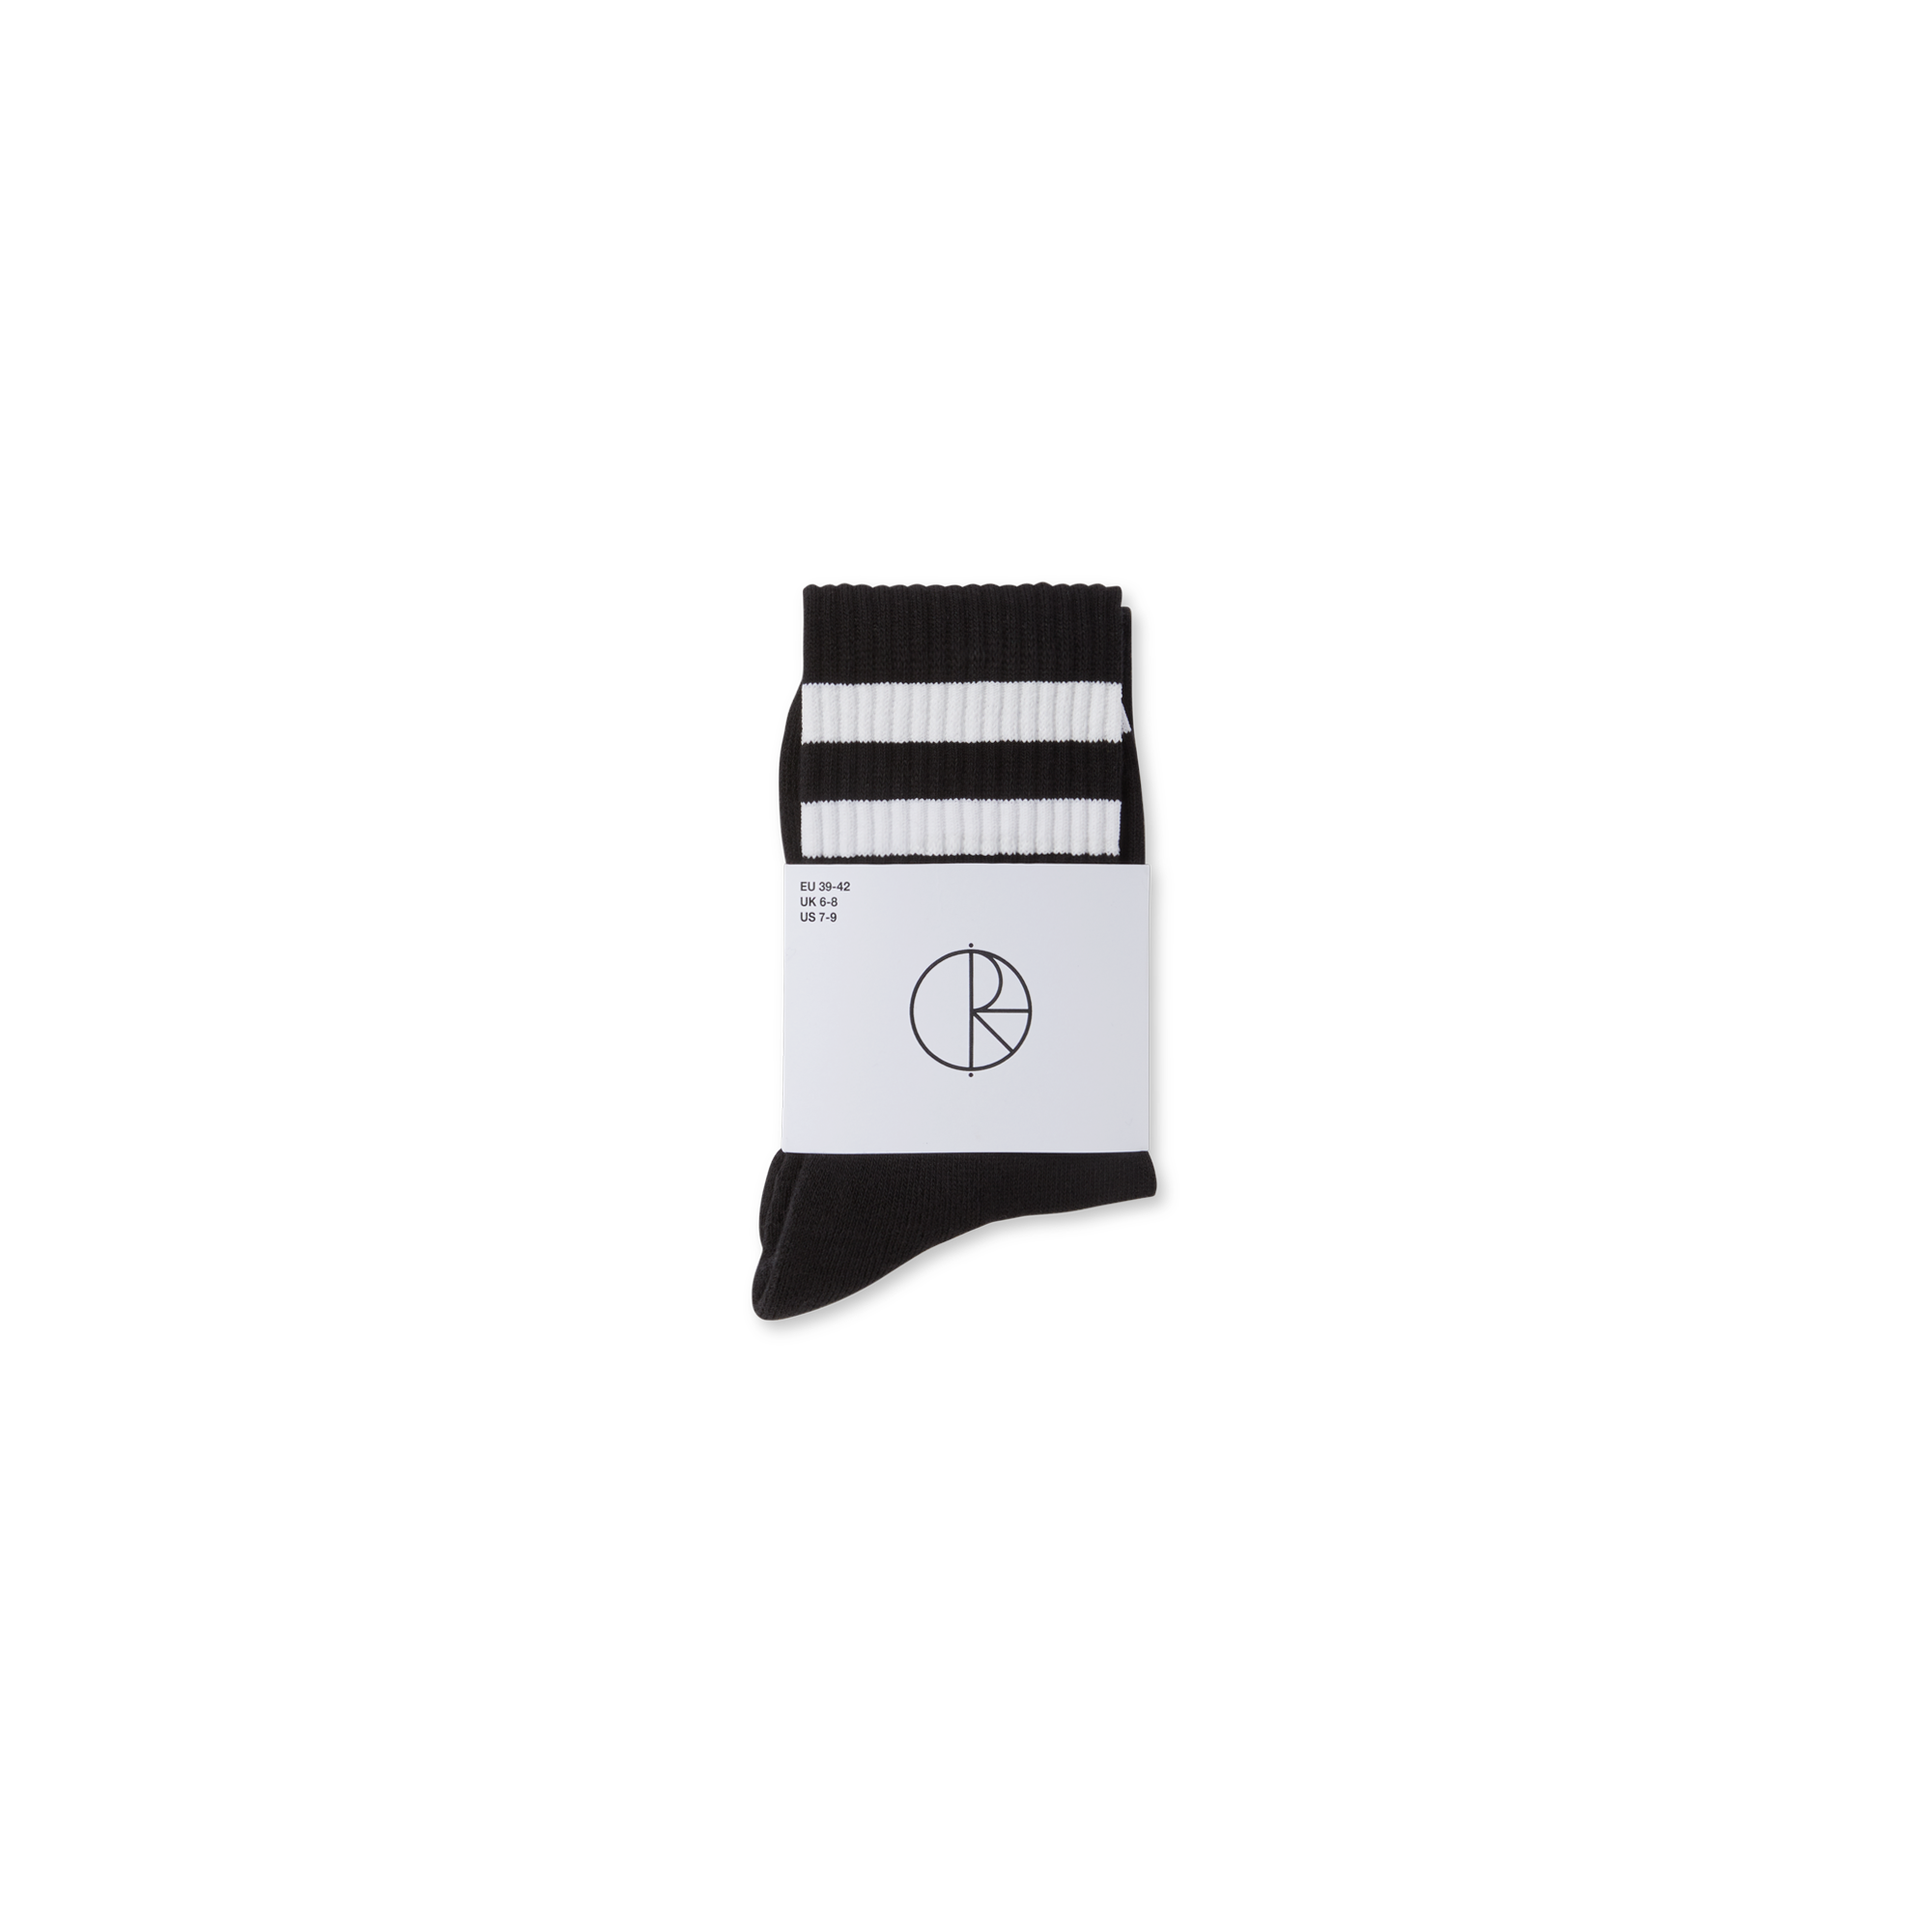 Black polar rib socks with white stripes and smiling and frowning face logos. Free delivery on items over £50